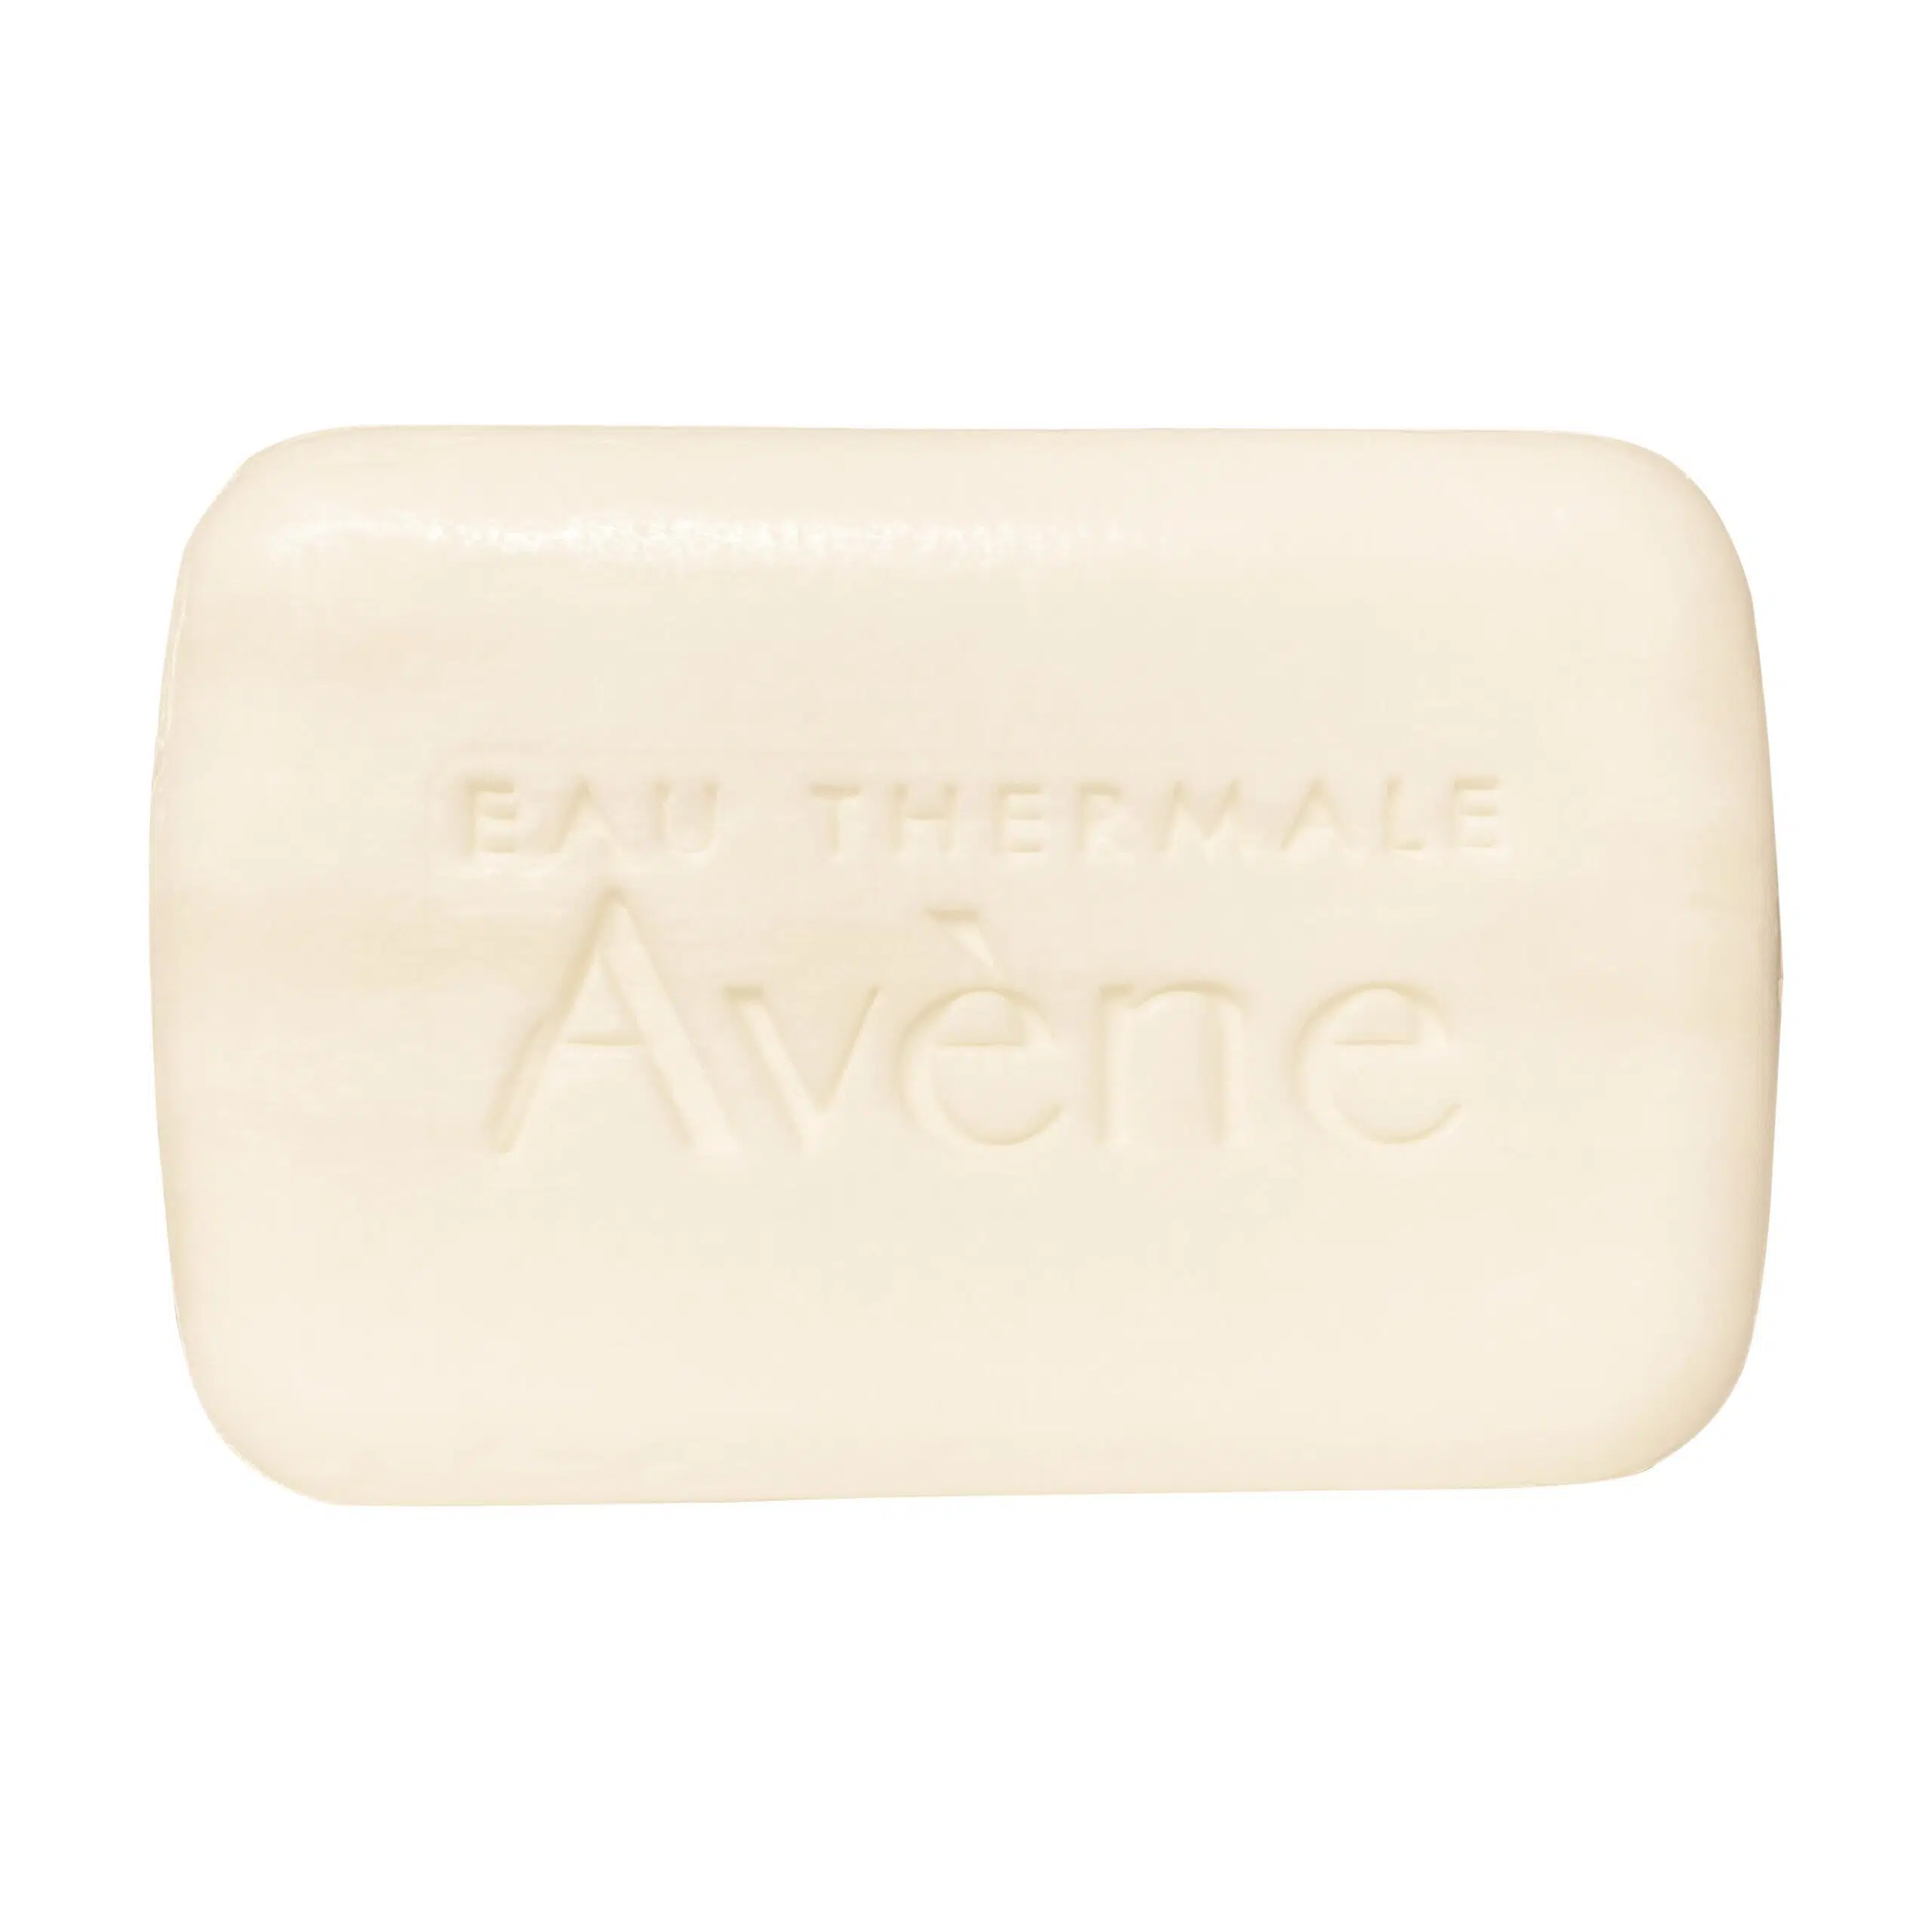 au+Thermale+Avne+-+Cleanance+Dermatological+Exfoliating+Soap